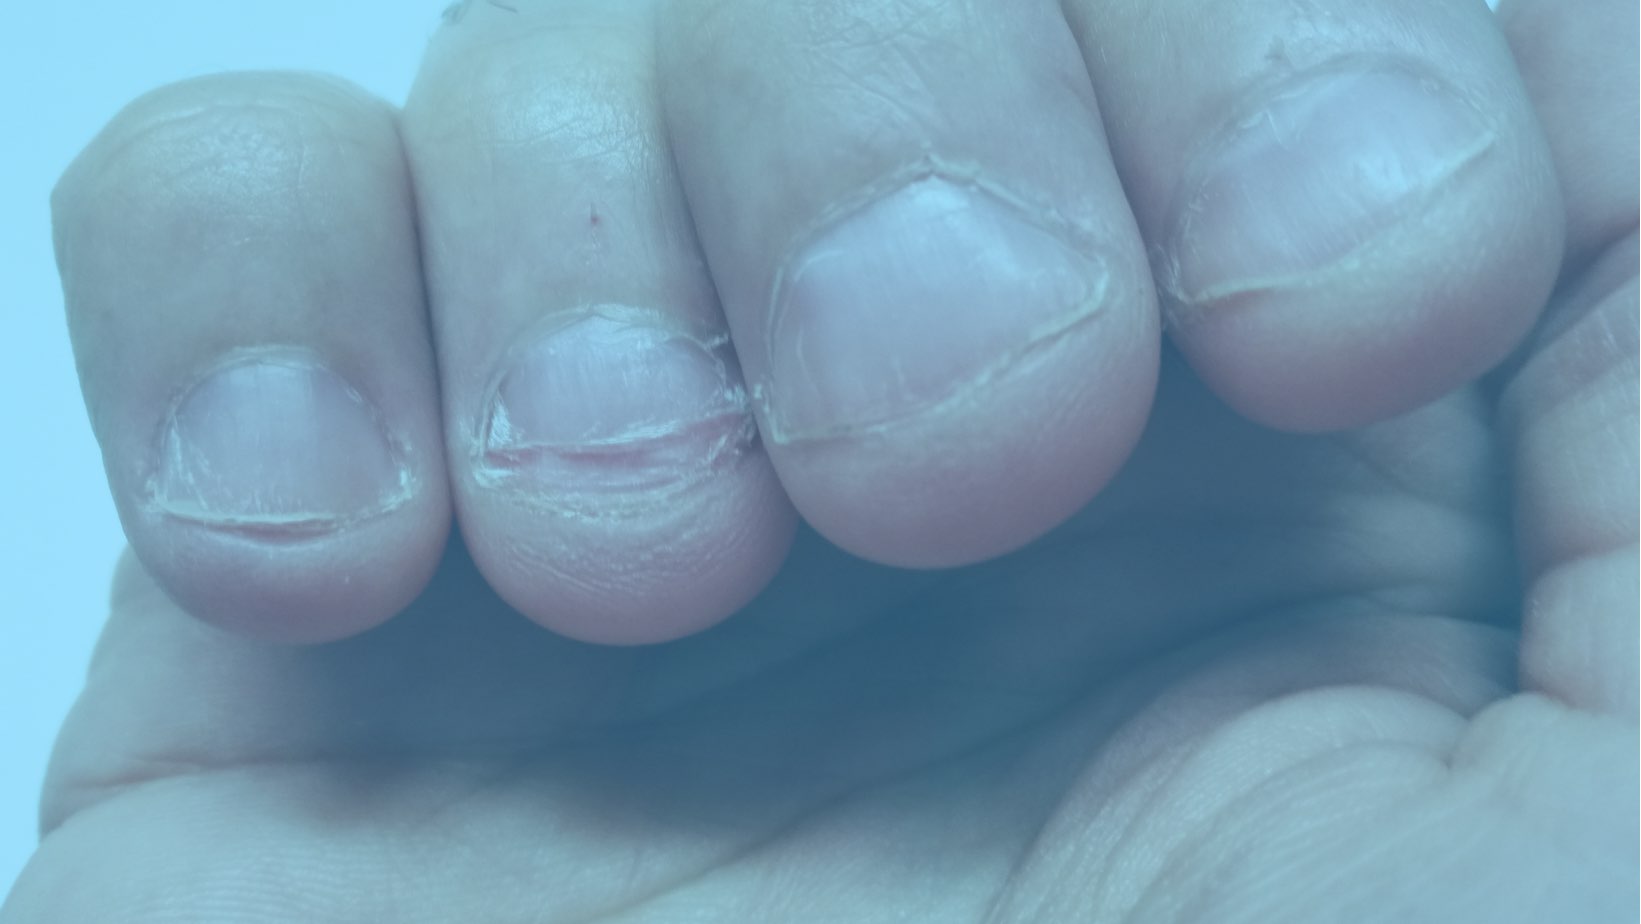 👉🏼Onychomycosis is a fungal infection of the nails. It affects about 10%  of adults and can cause discolouration, thickening, and… | Instagram